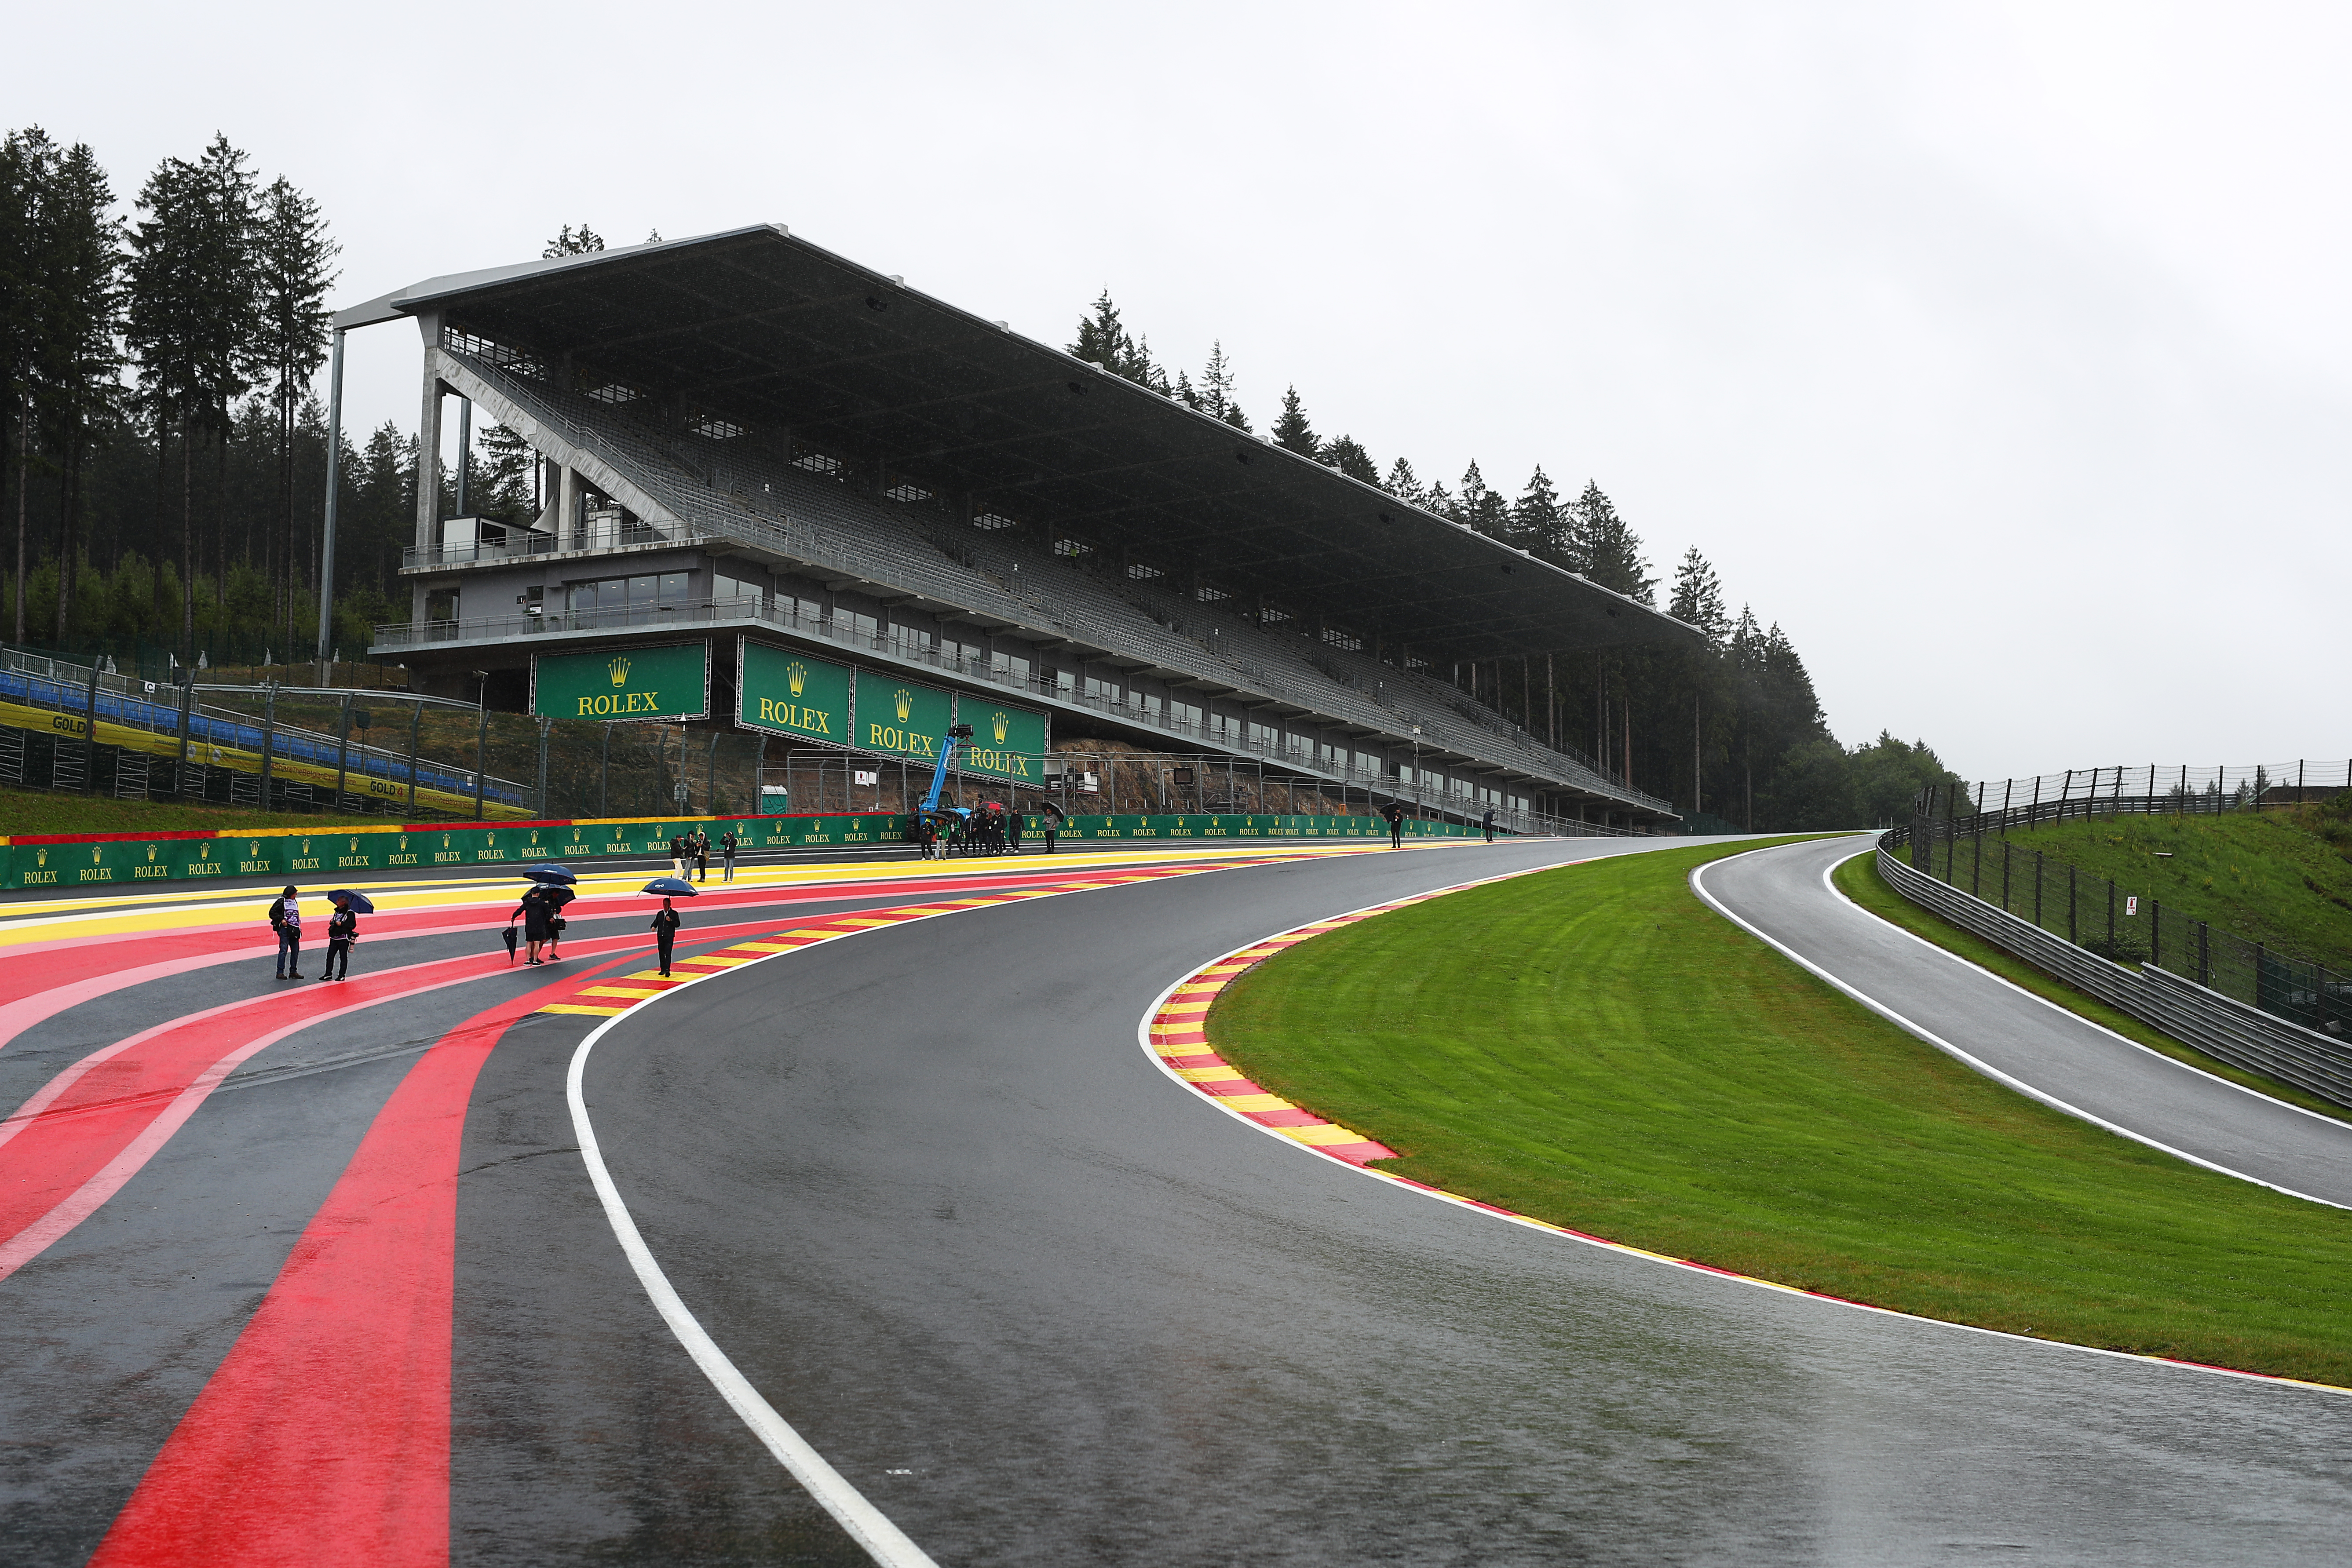 Rain is expected all weekend at the circuit